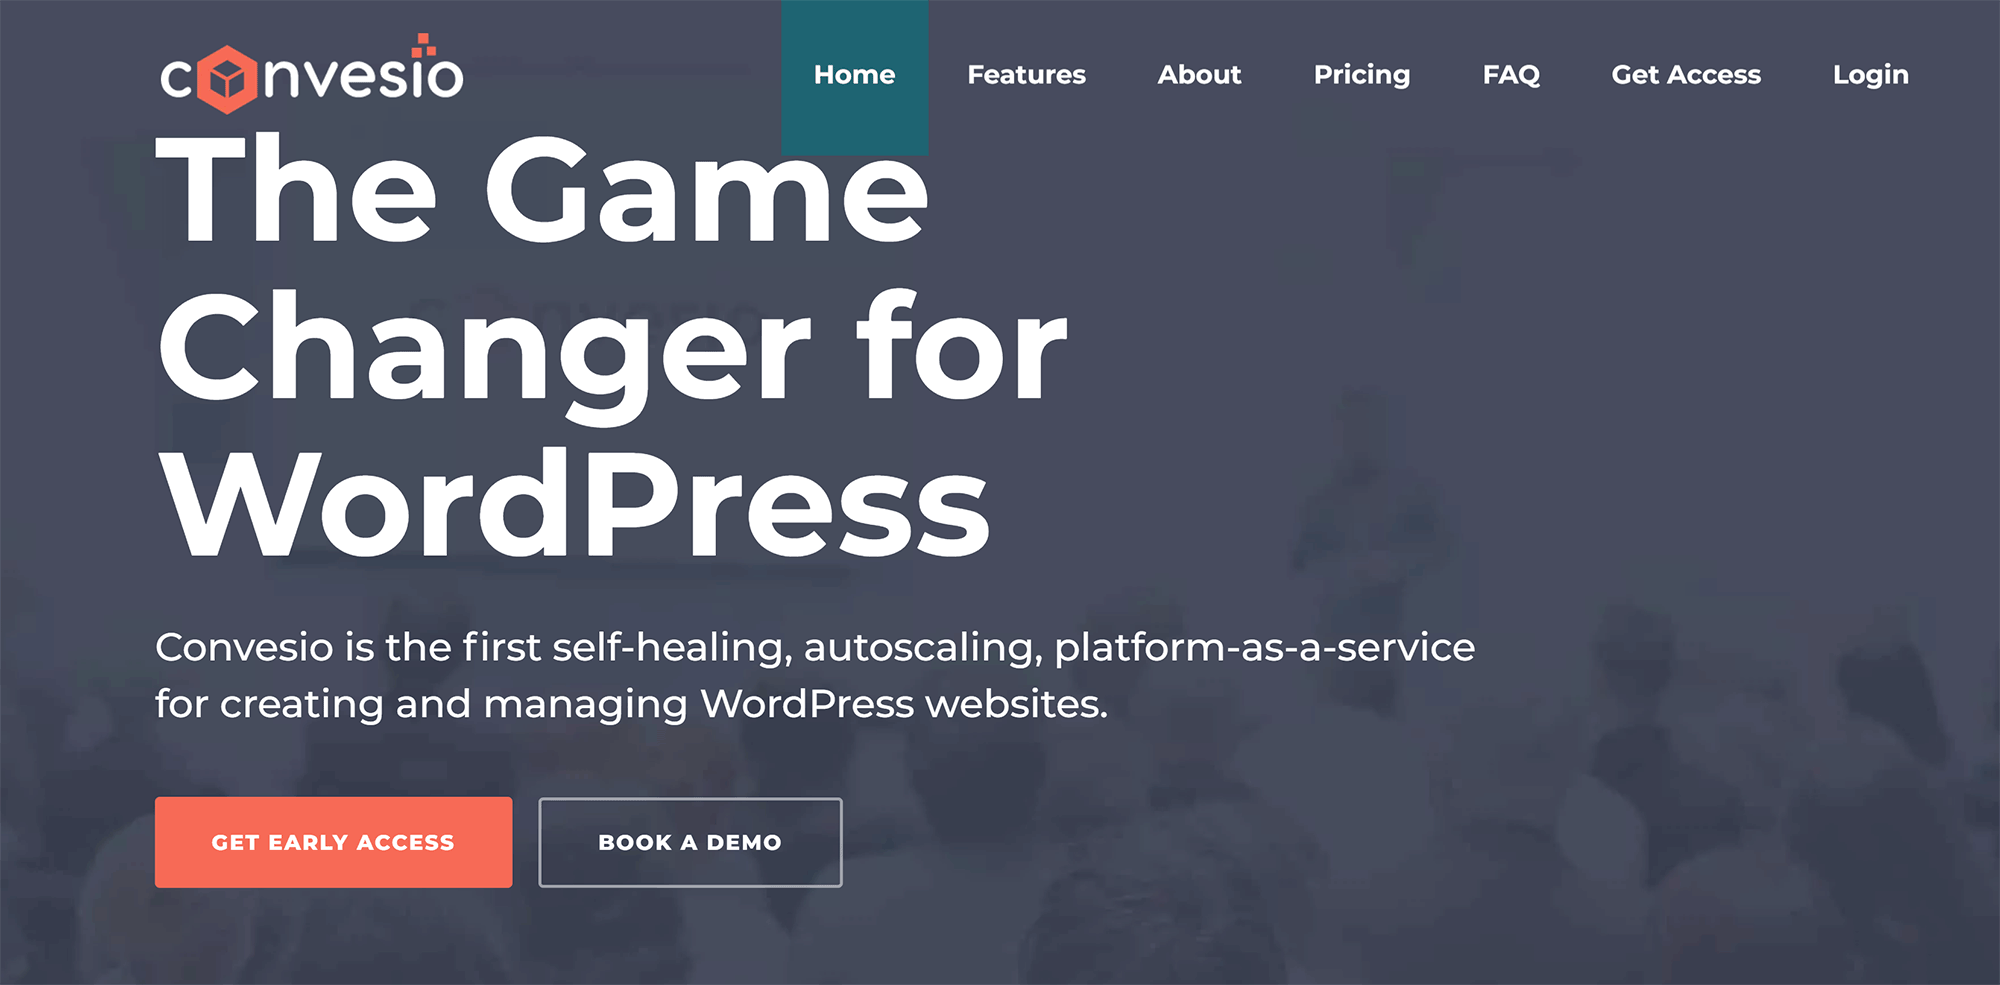 Convesio is a game changer for WordPress